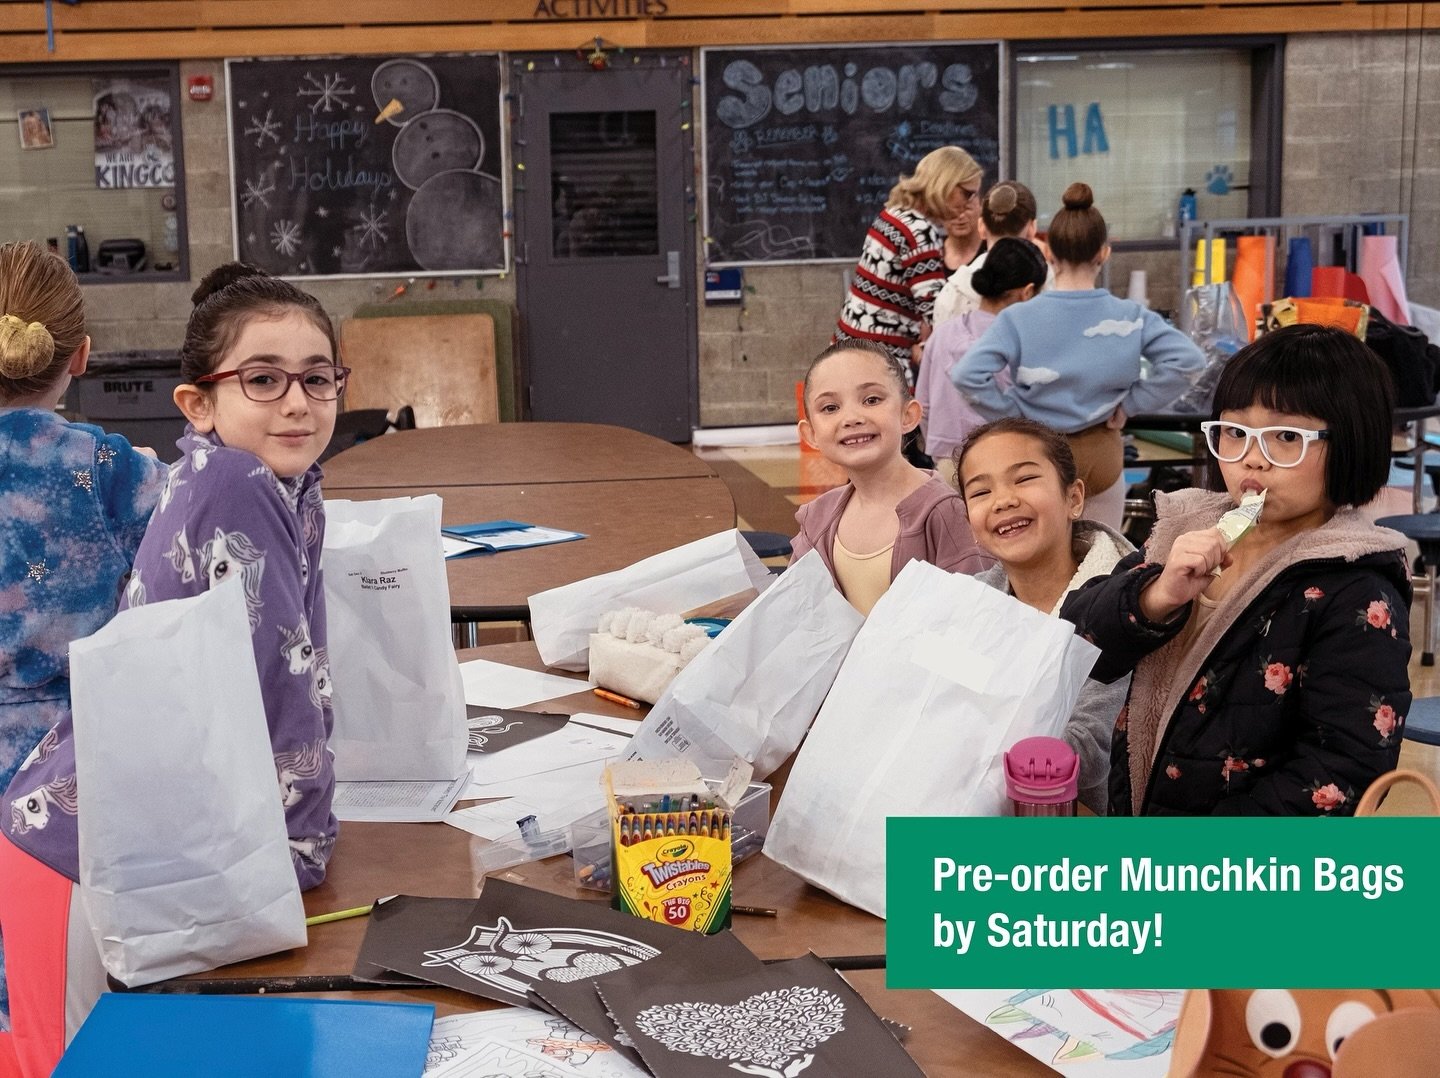 Munchkin bags keep dancers and volunteers fueled on performance weekends. They include an assortment of snack items plus your choice of a large muffin or bagel and cream cheese. They&rsquo;re available by pre-order only, so go to the Family login to 